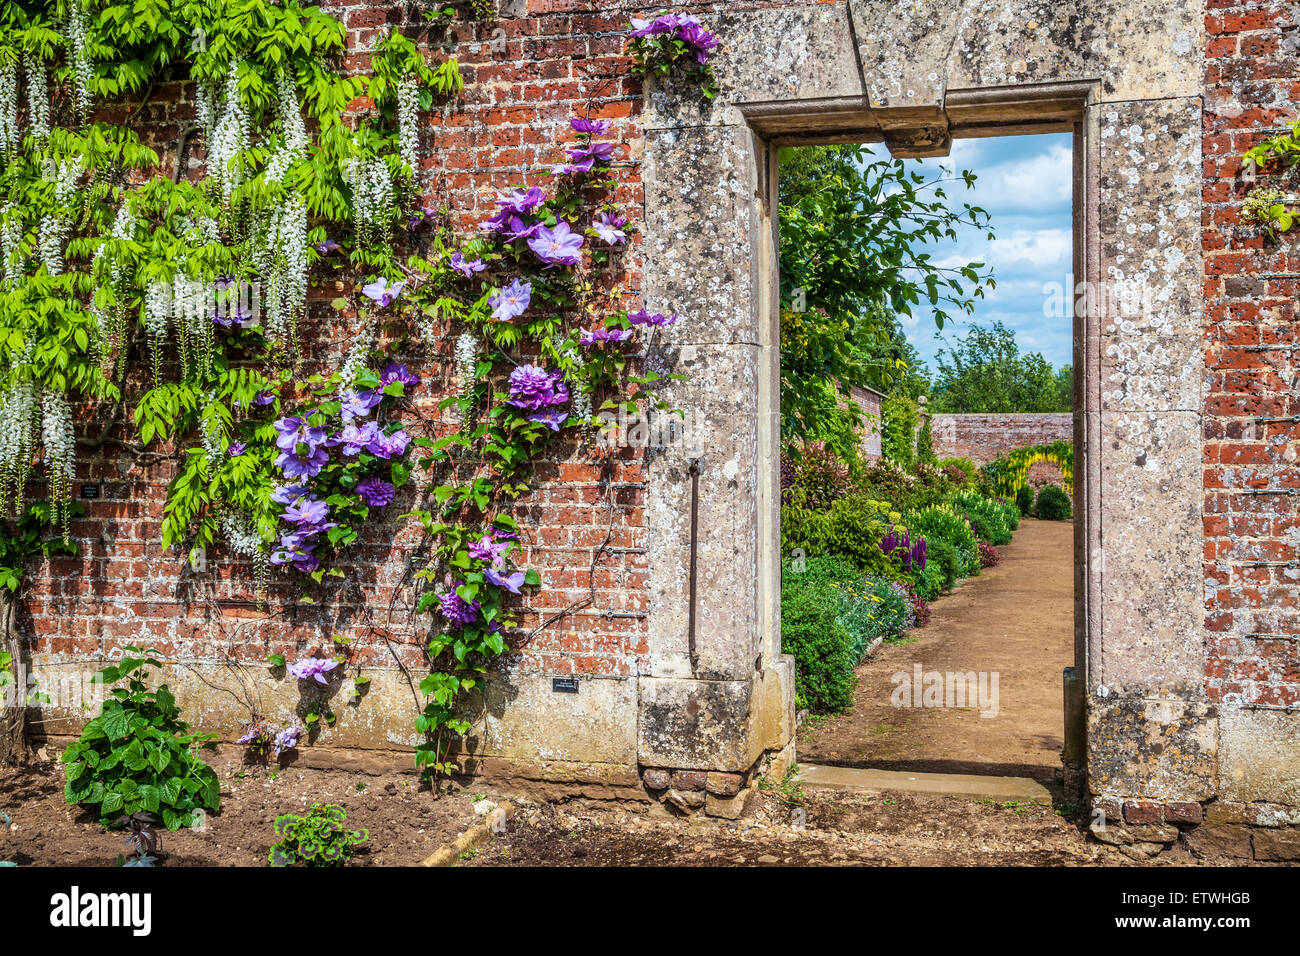 White flowering Chinese wisteria sinensis and clematis in the walled garden of Bowood House in Wiltshire. Stock Photo